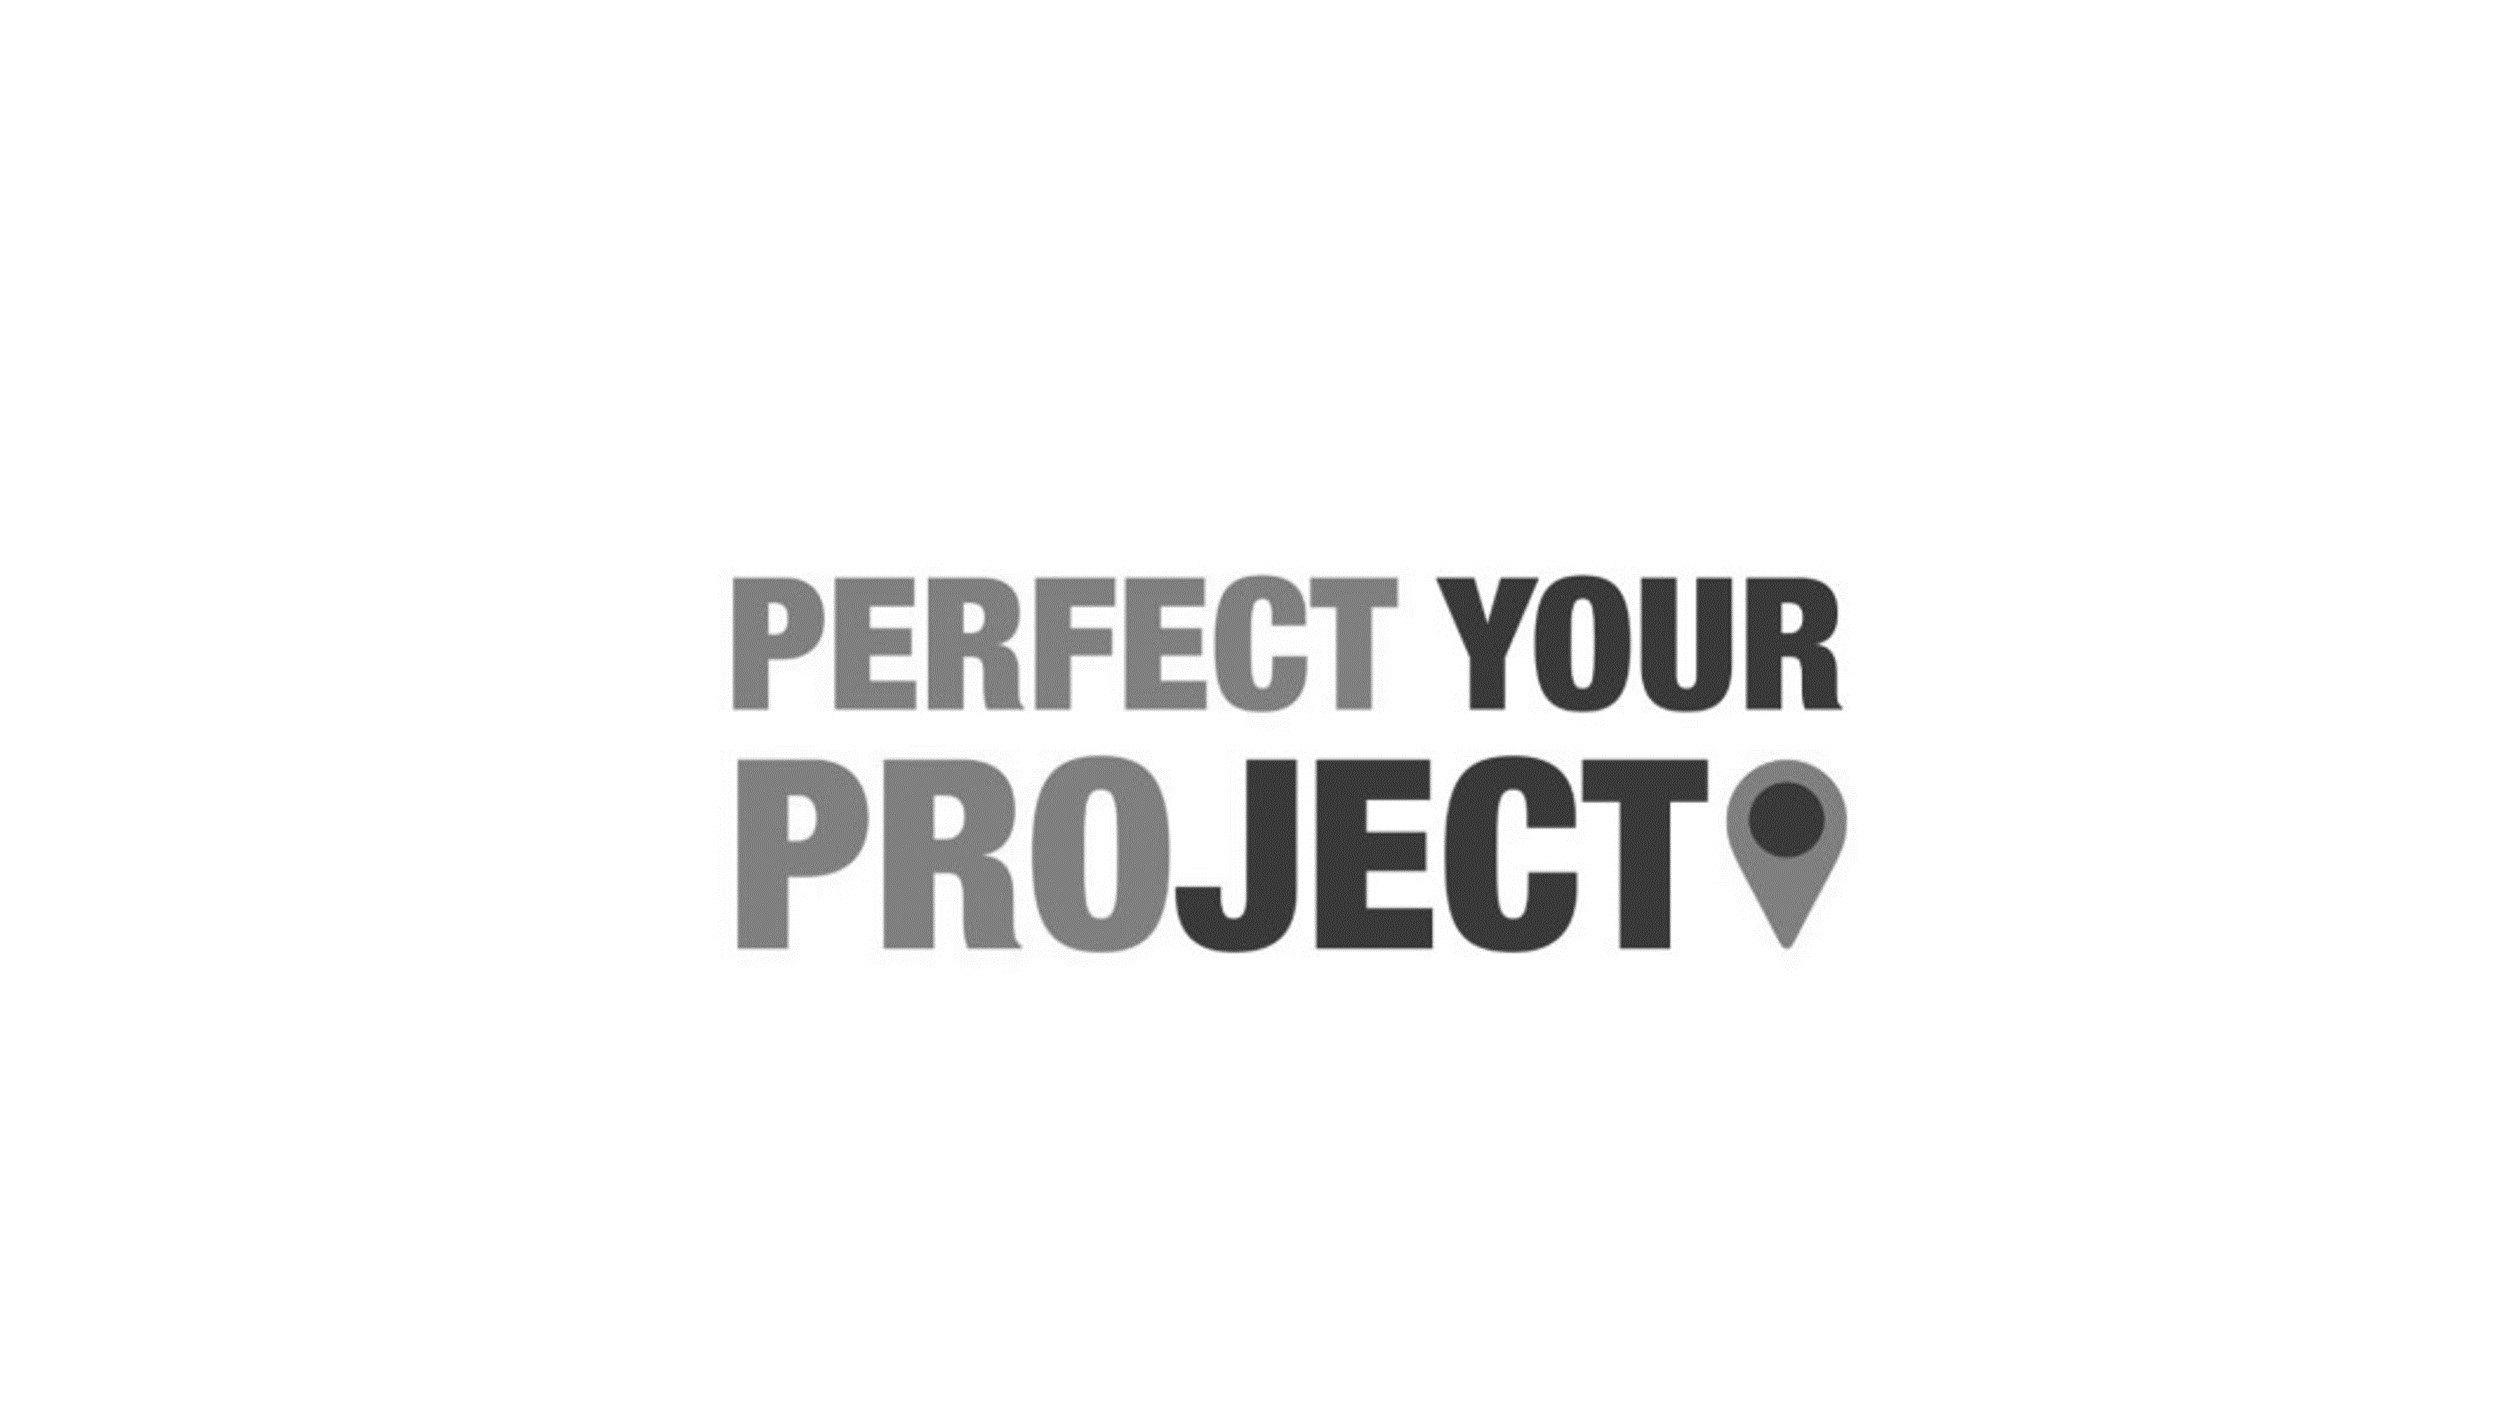  PERFECT YOUR PROJECT